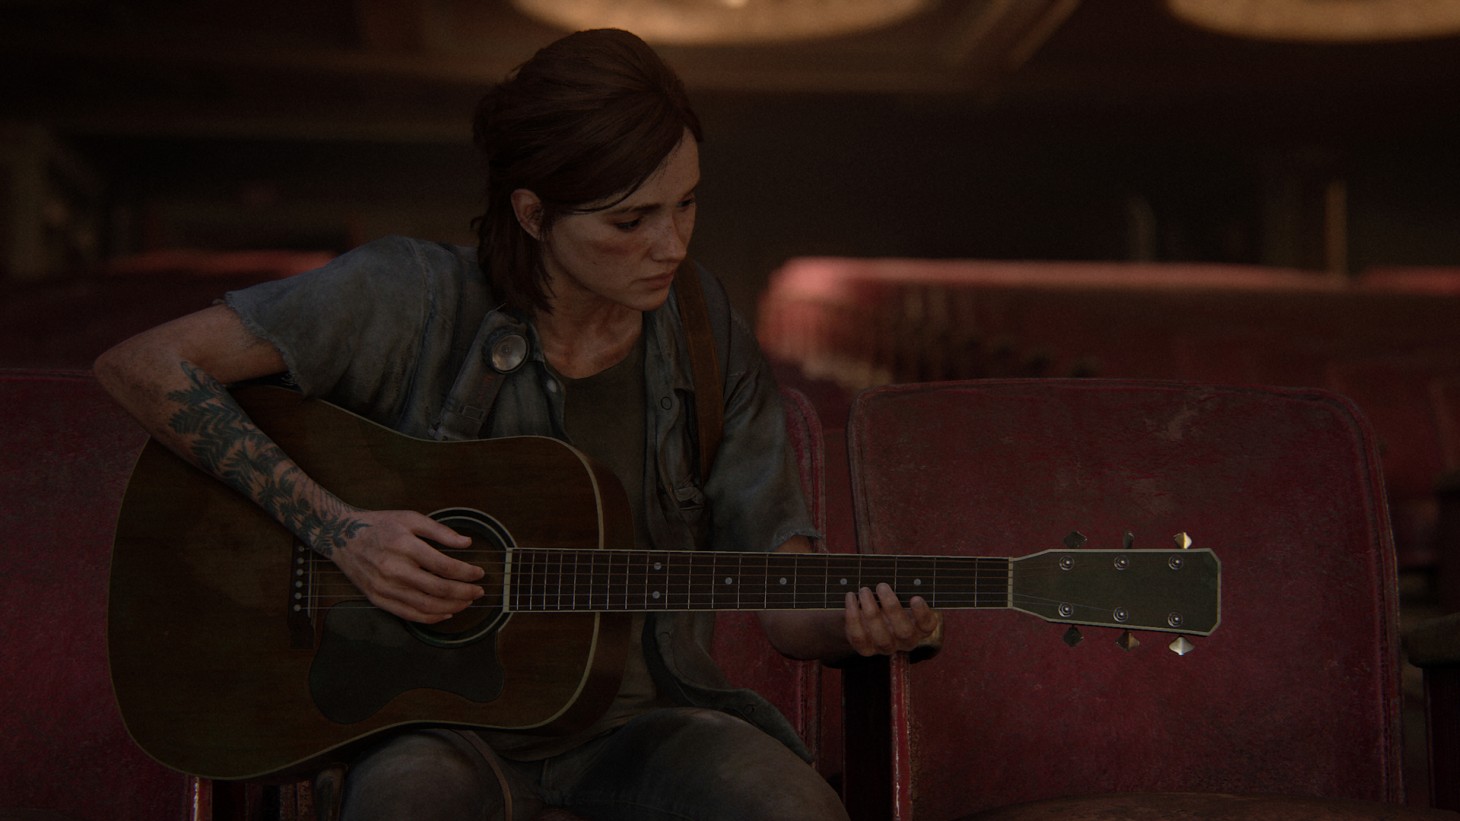 Keep making art: The Last of Us author Neill Druckmann supports Rockstar  developers after Grand Theft Auto VI data leak